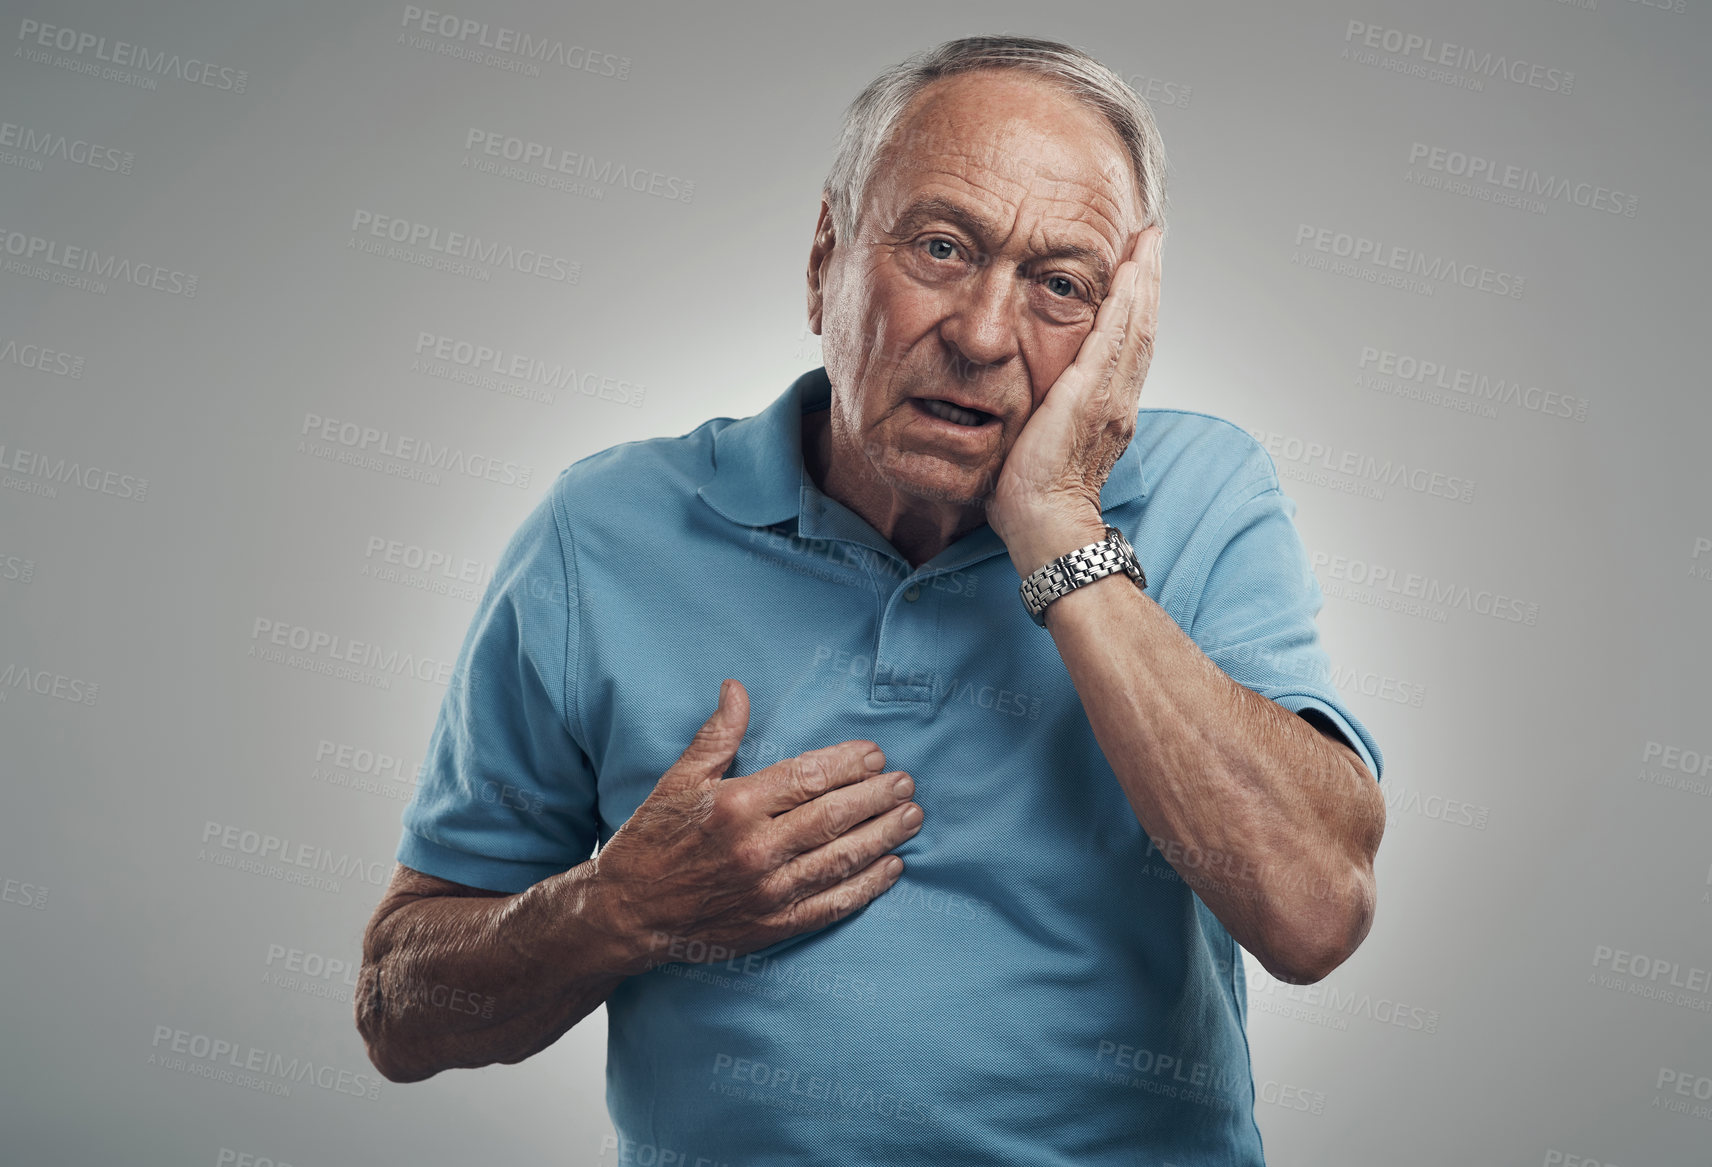 Buy stock photo Shot of an old man touching his hand to his face in a studio against a grey background